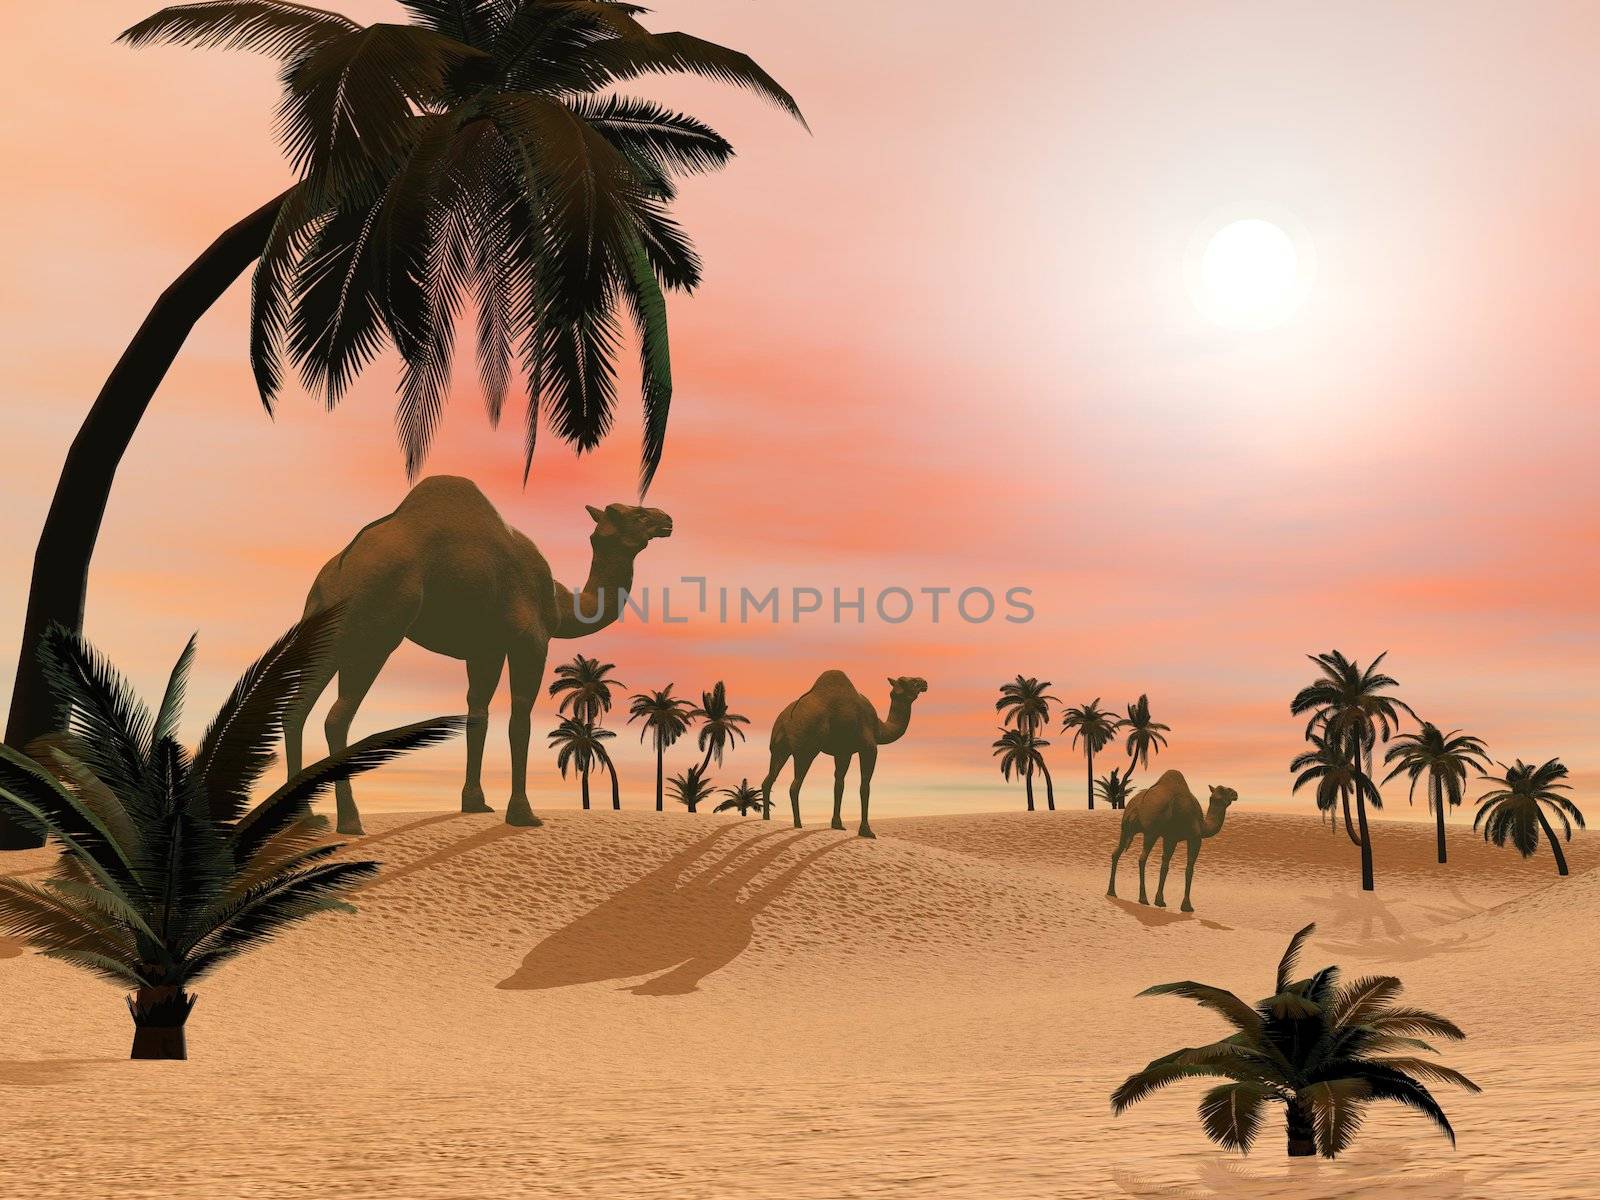 Camels standing in a sand desert with palmtrees by sunset light - 3D render